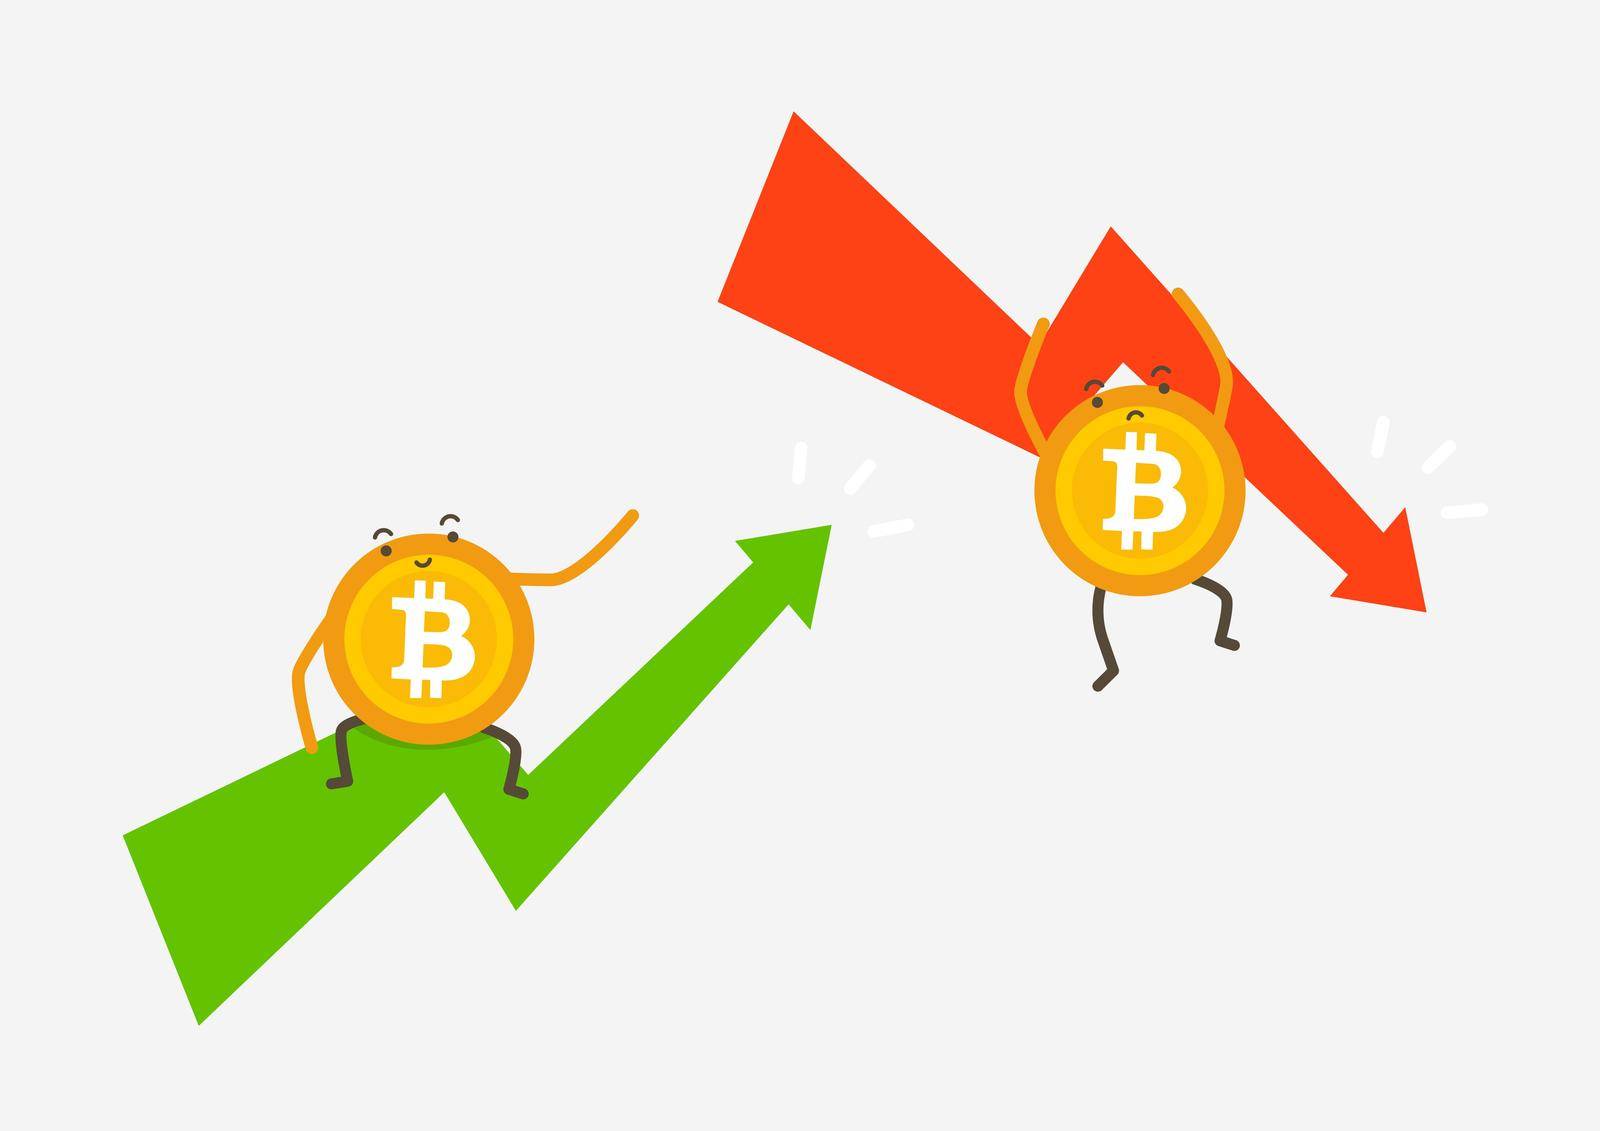 Bitcoin in bullish or bearish market trend in crypto currency. Green up or red down arrow graph. Cryptocurrency cartoon concept.